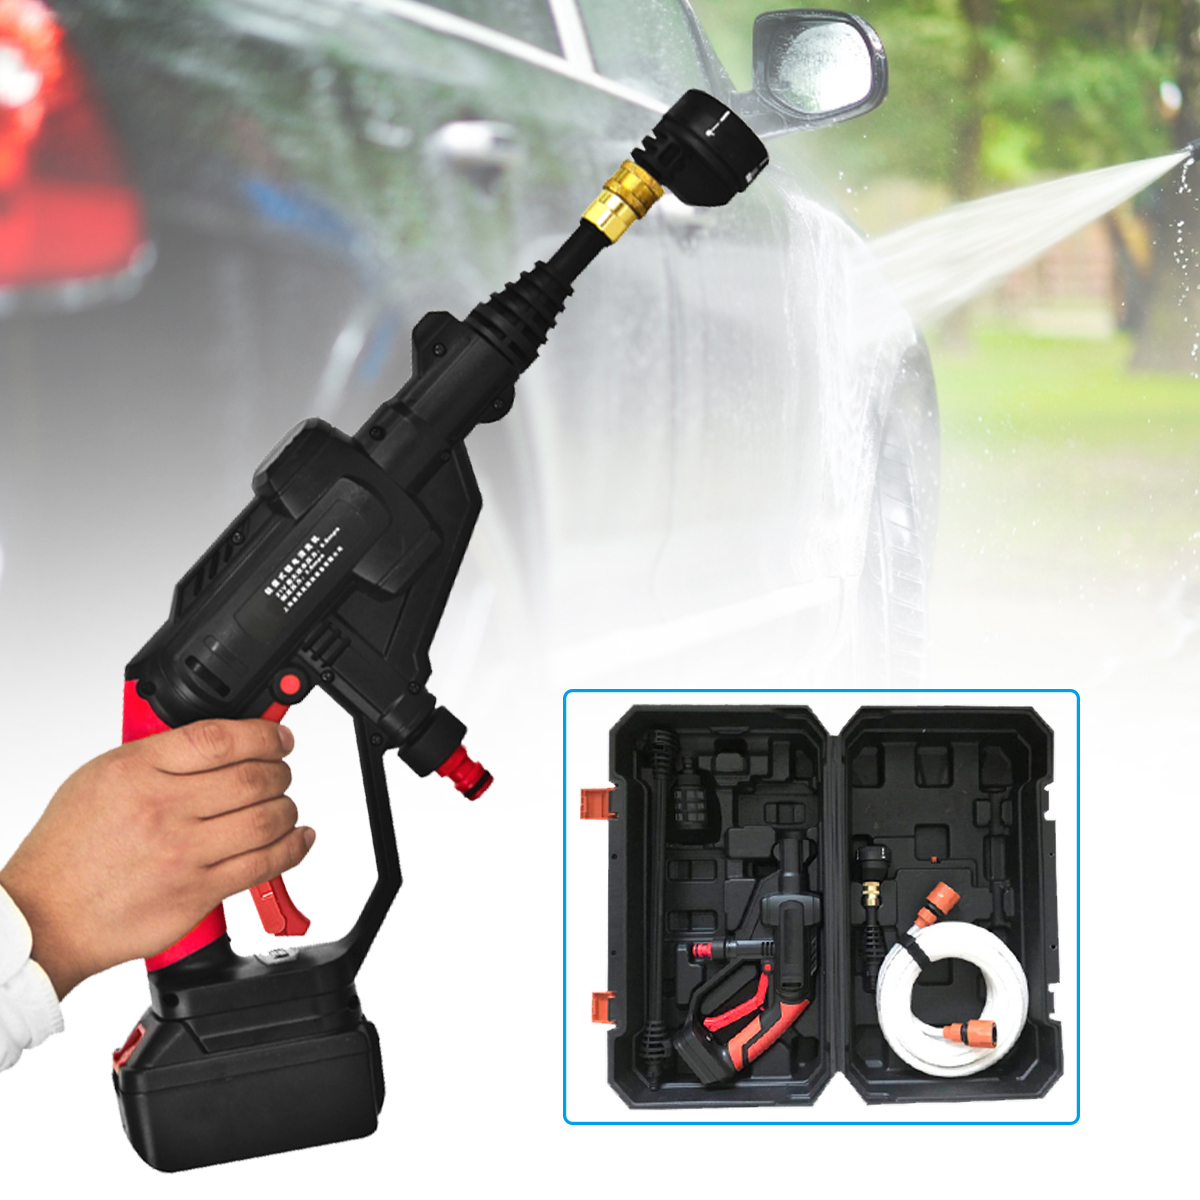 Multifunctional Cordless Pressure Cleaner Washer Gun Water Hose Nozzle Pump with Battery 13